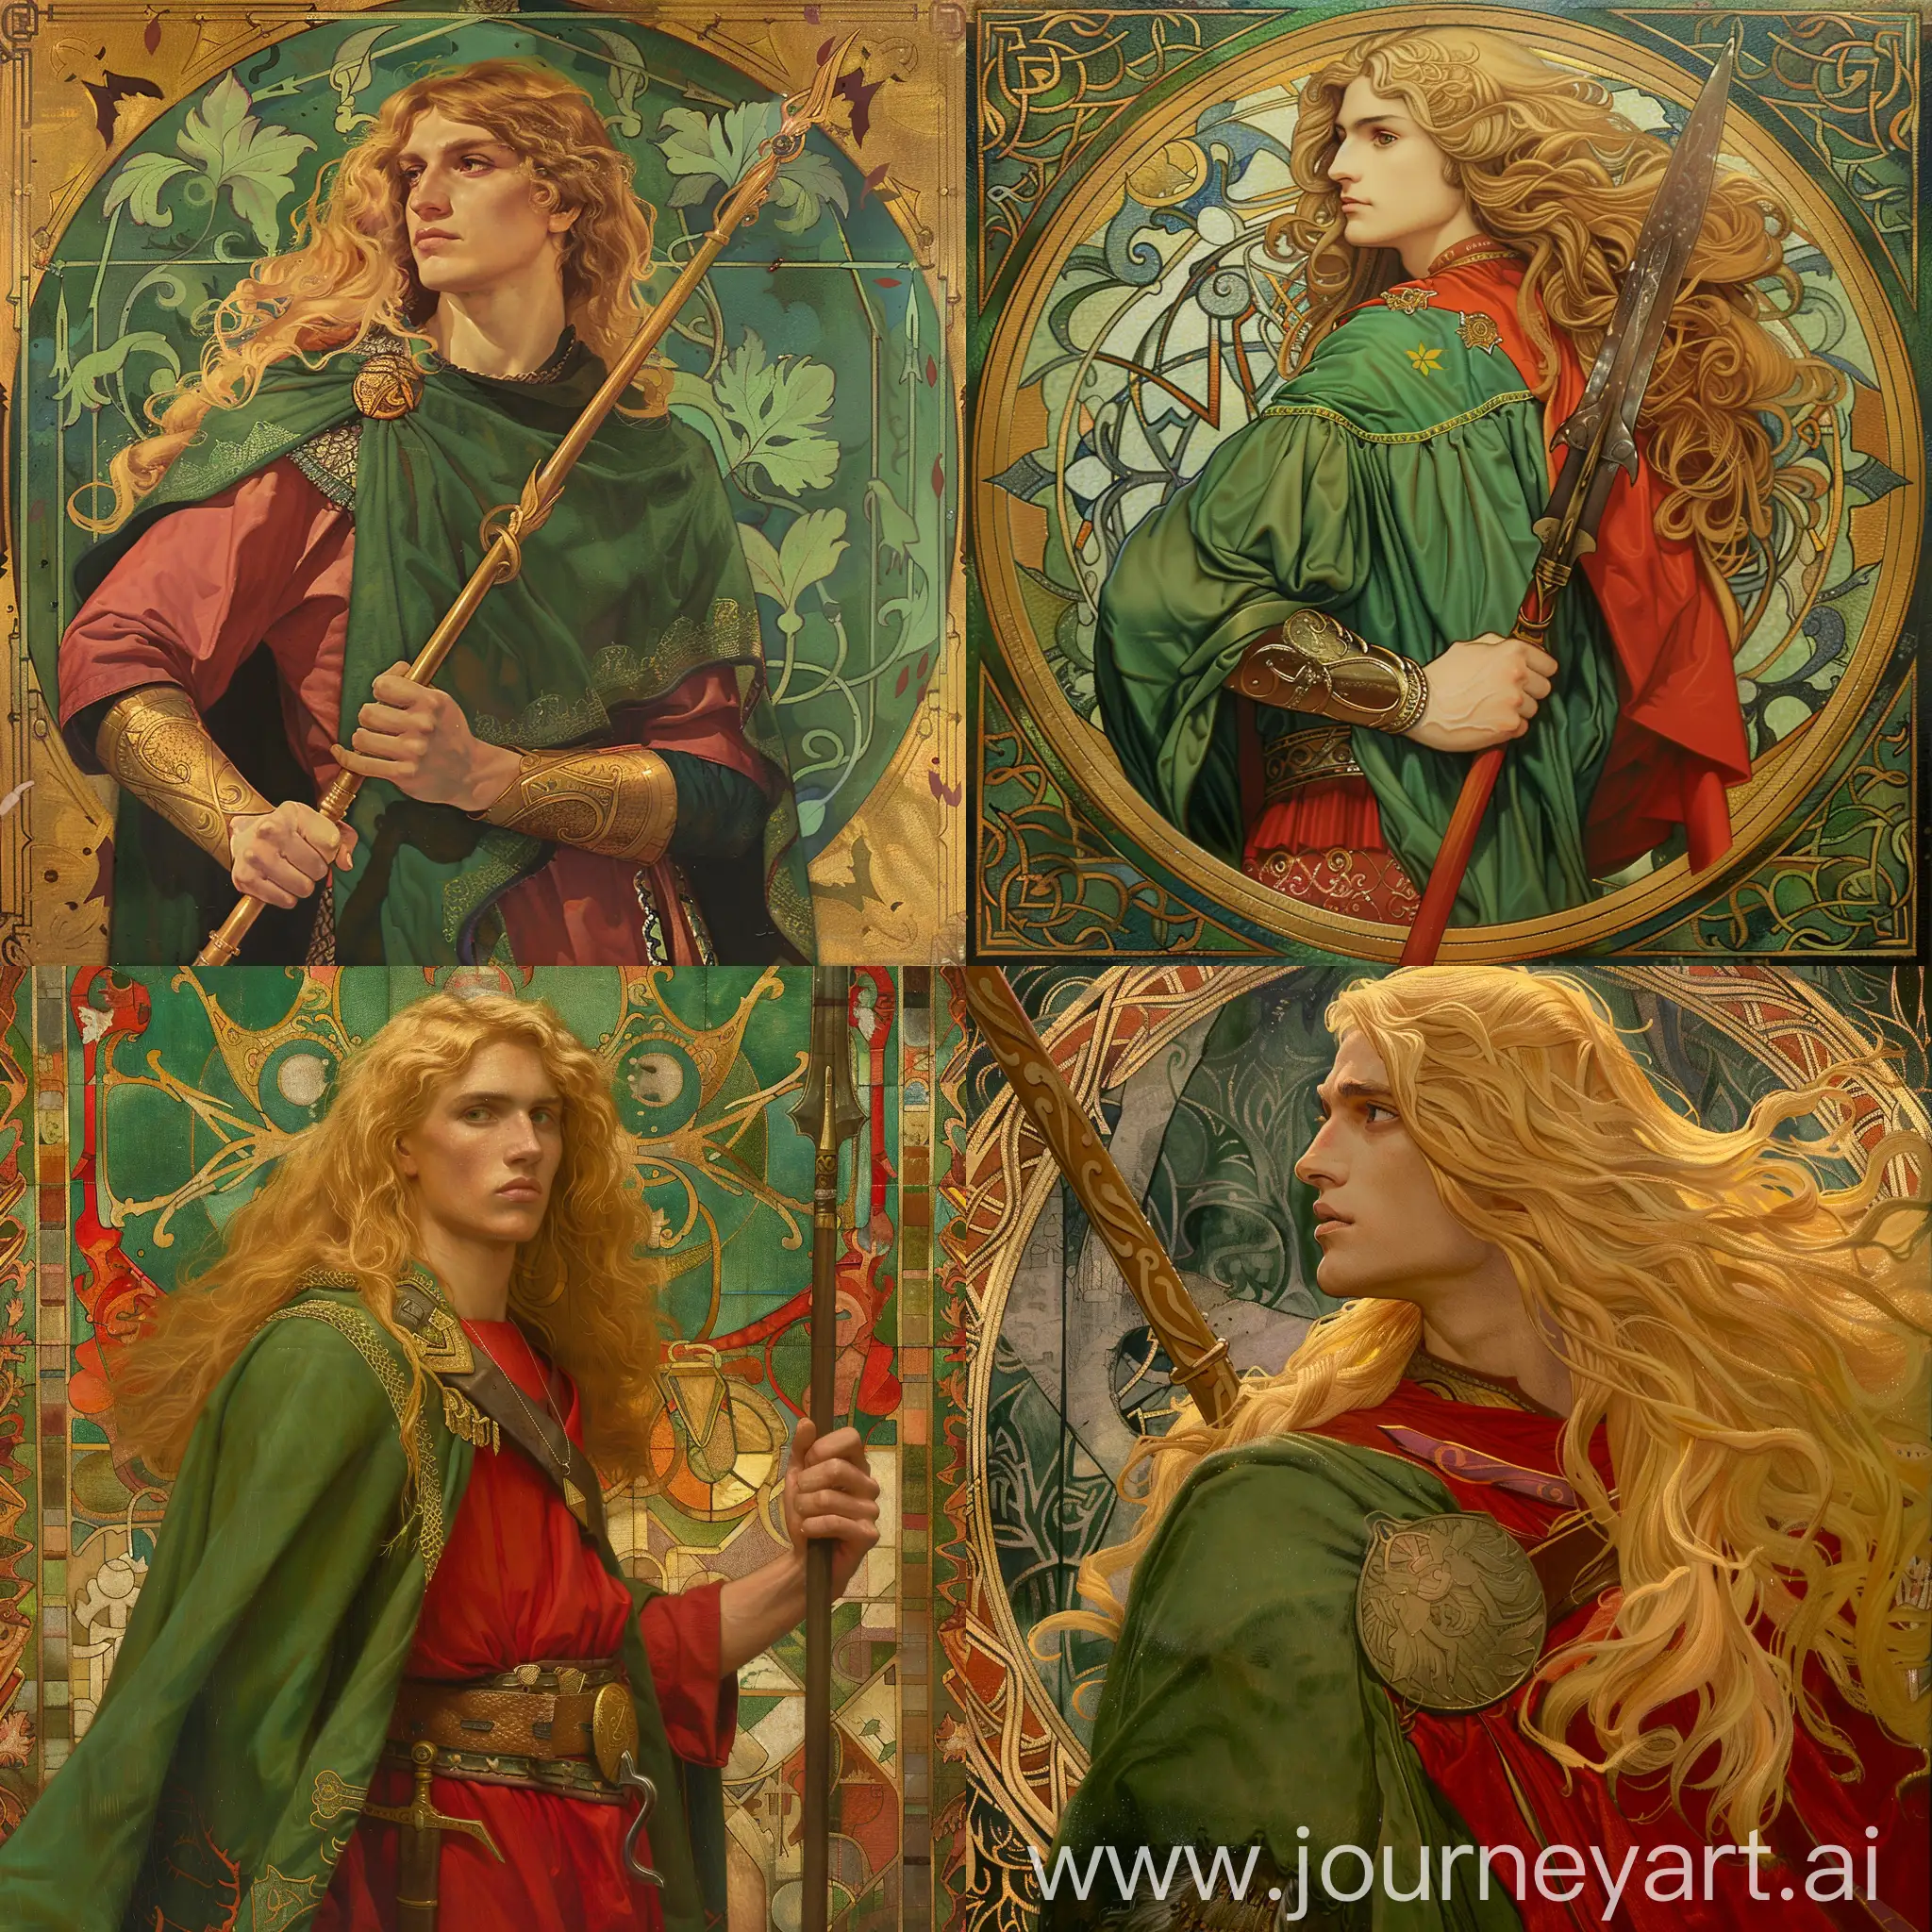 Young man with long golden hair, in the green mantle and red tunic, with spear, art nouveau